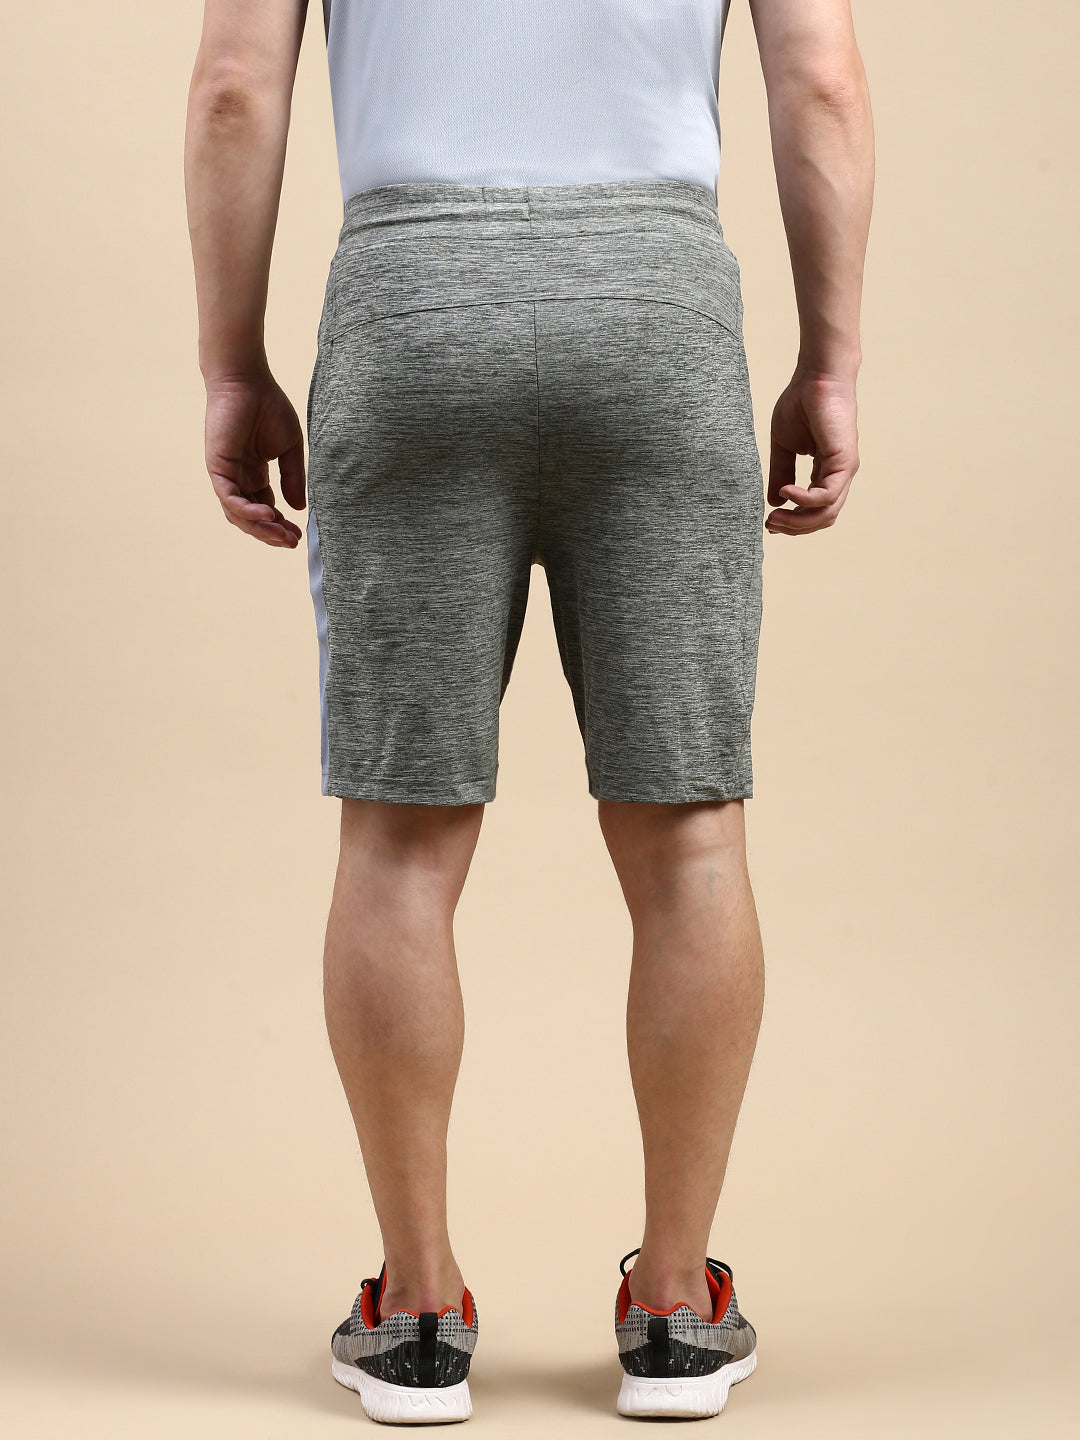 Classic Polo Men's Modal Solid Trunks